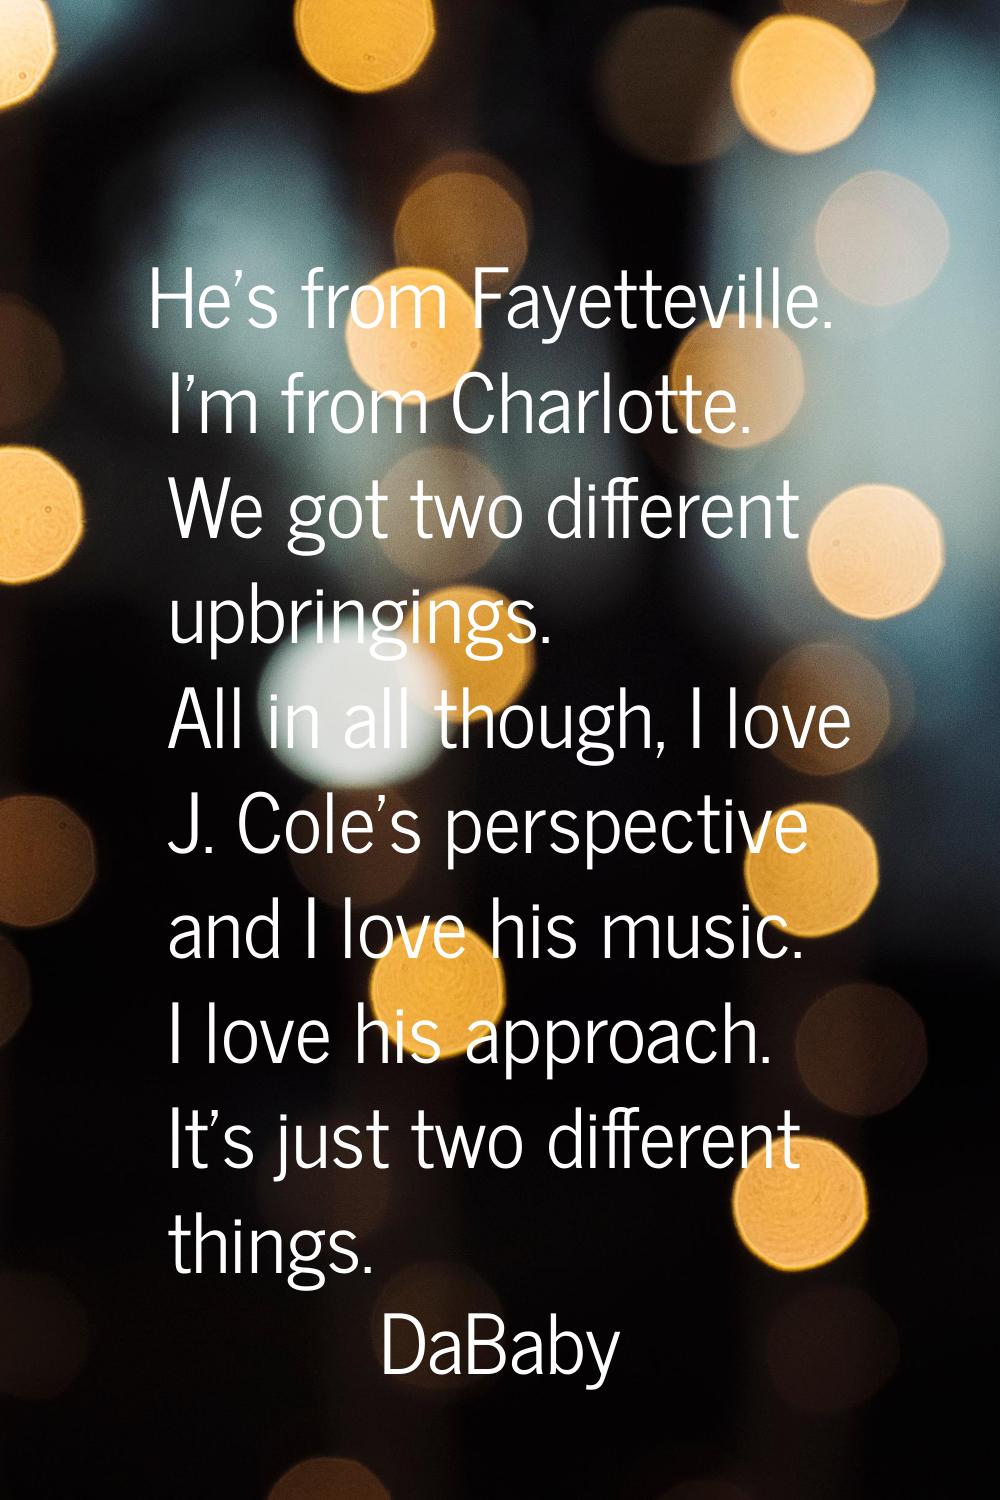 He's from Fayetteville. I'm from Charlotte. We got two different upbringings. All in all though, I 